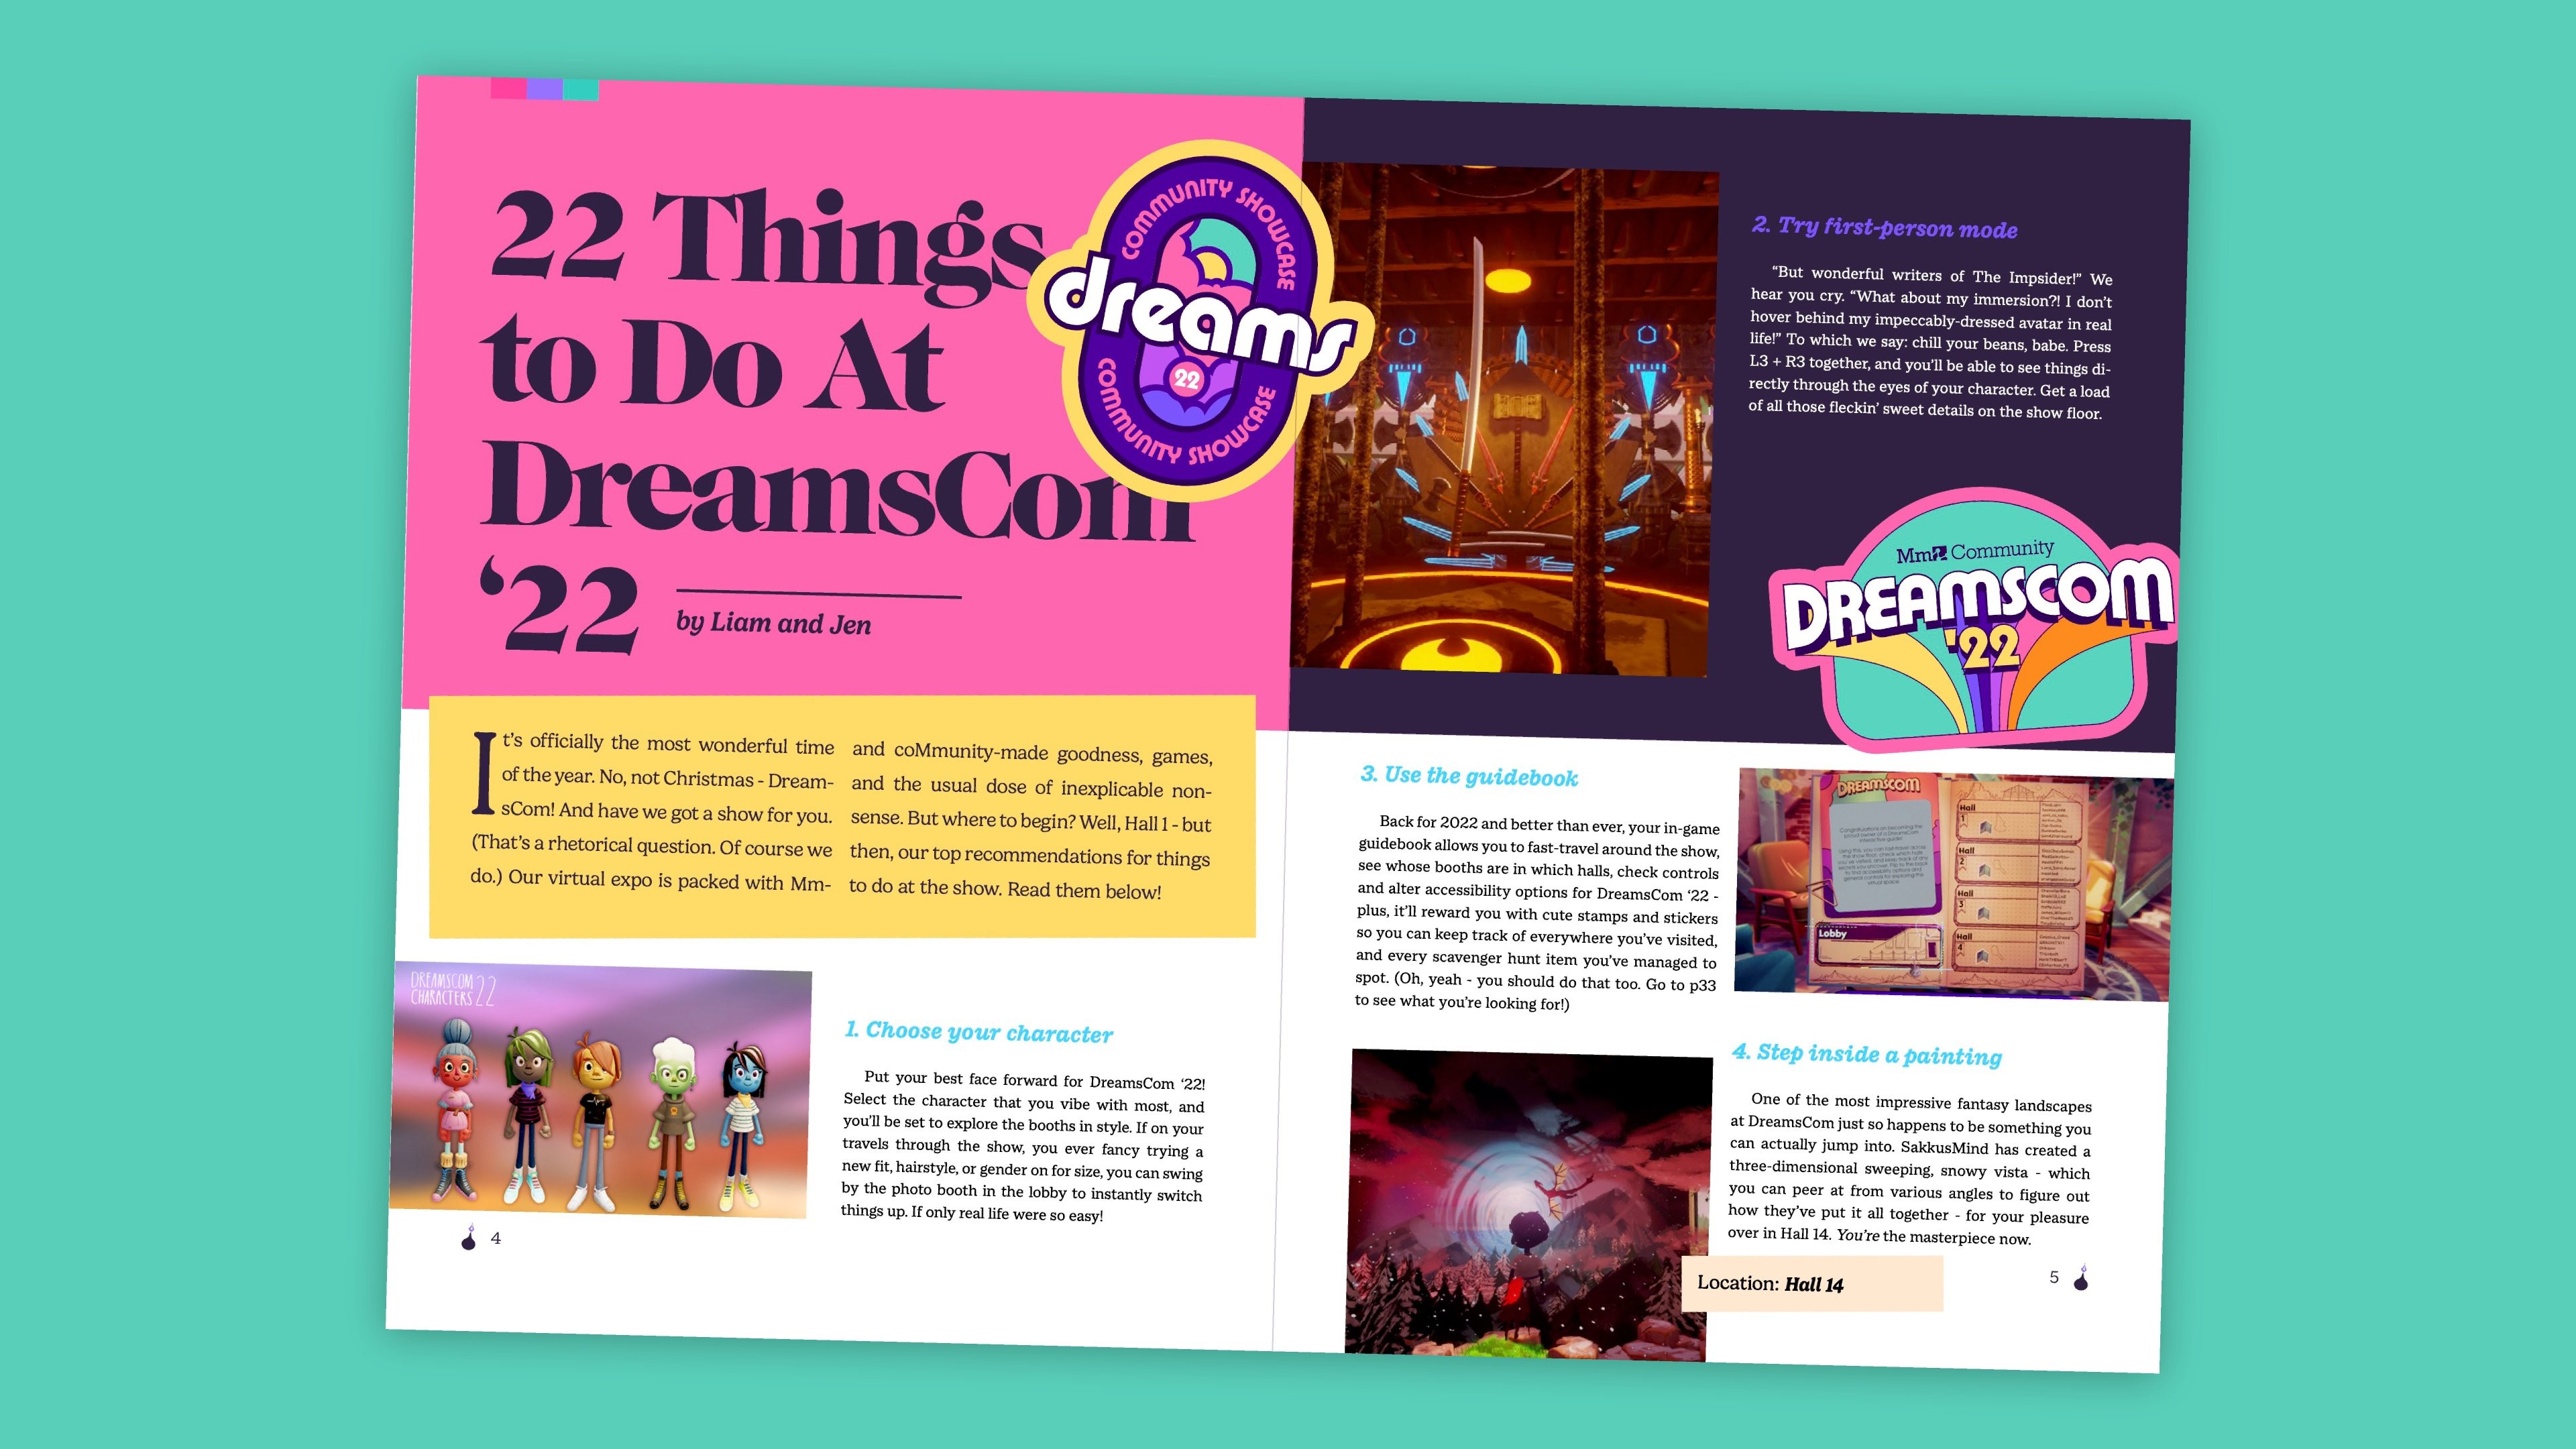 A screenshot from an Impsider magazine article about 22 Things to Do At DreamsCom '22.